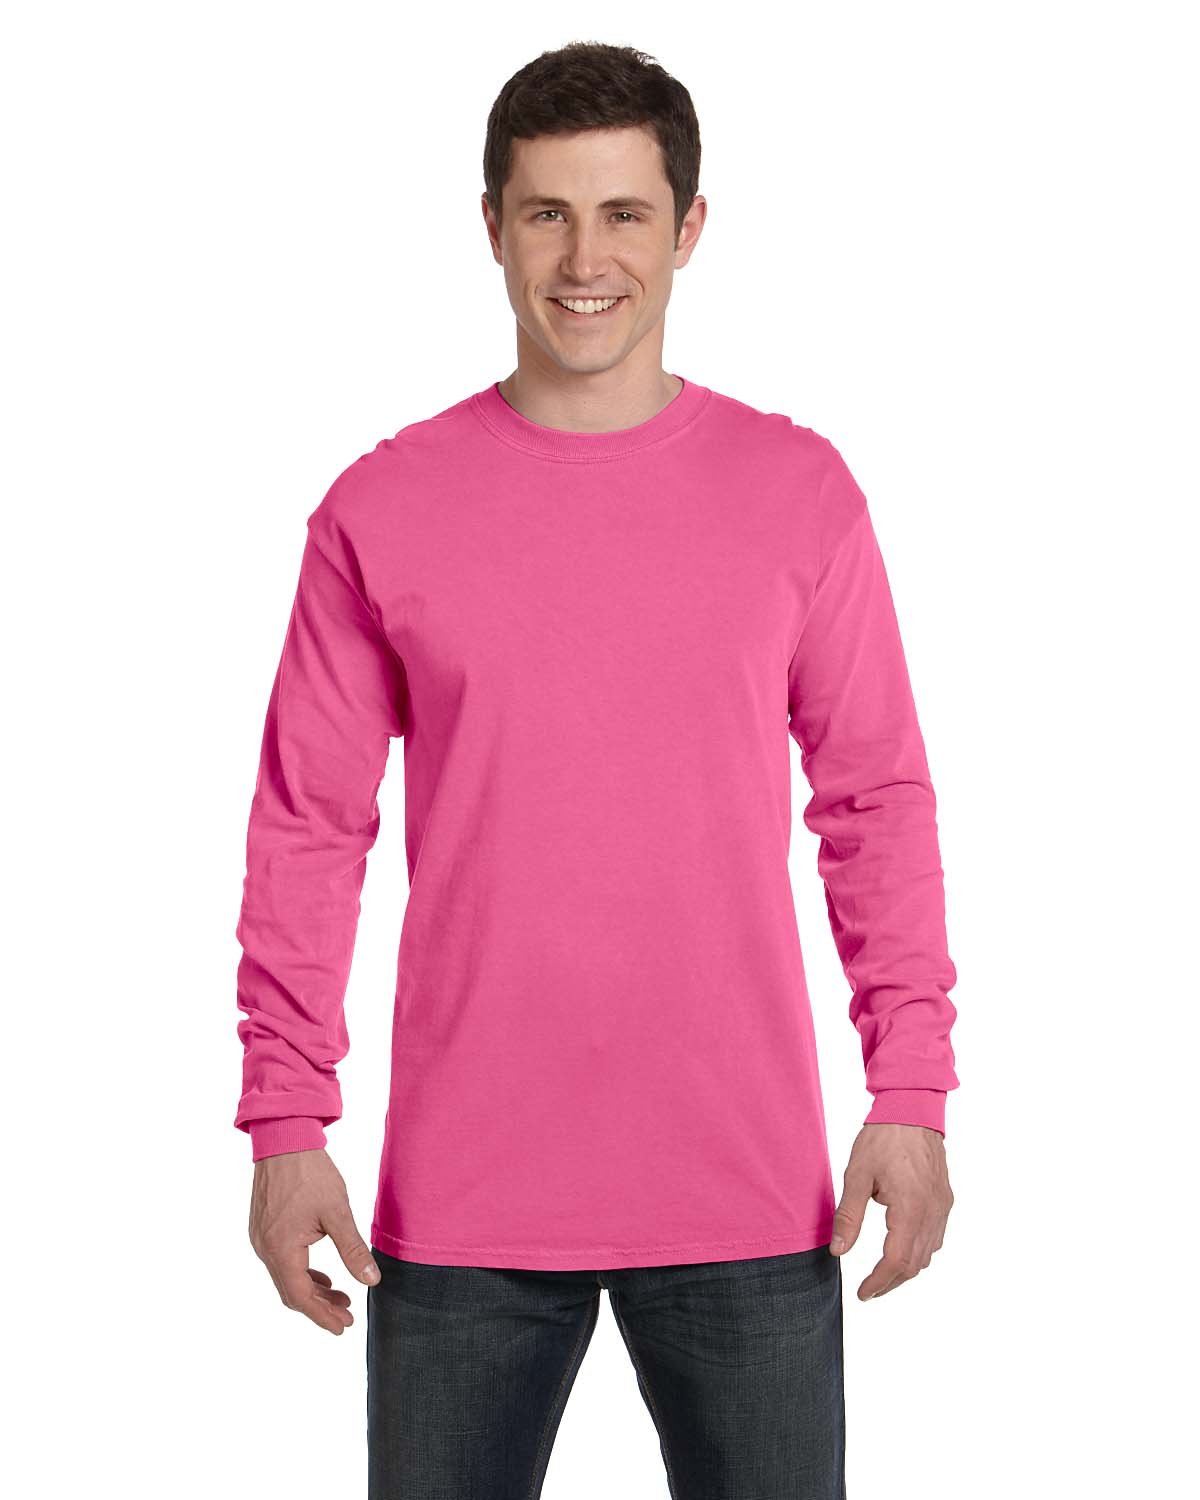 Adult Heavyweight Rs Long-Sleeve T-Shirt-Comfort Colors